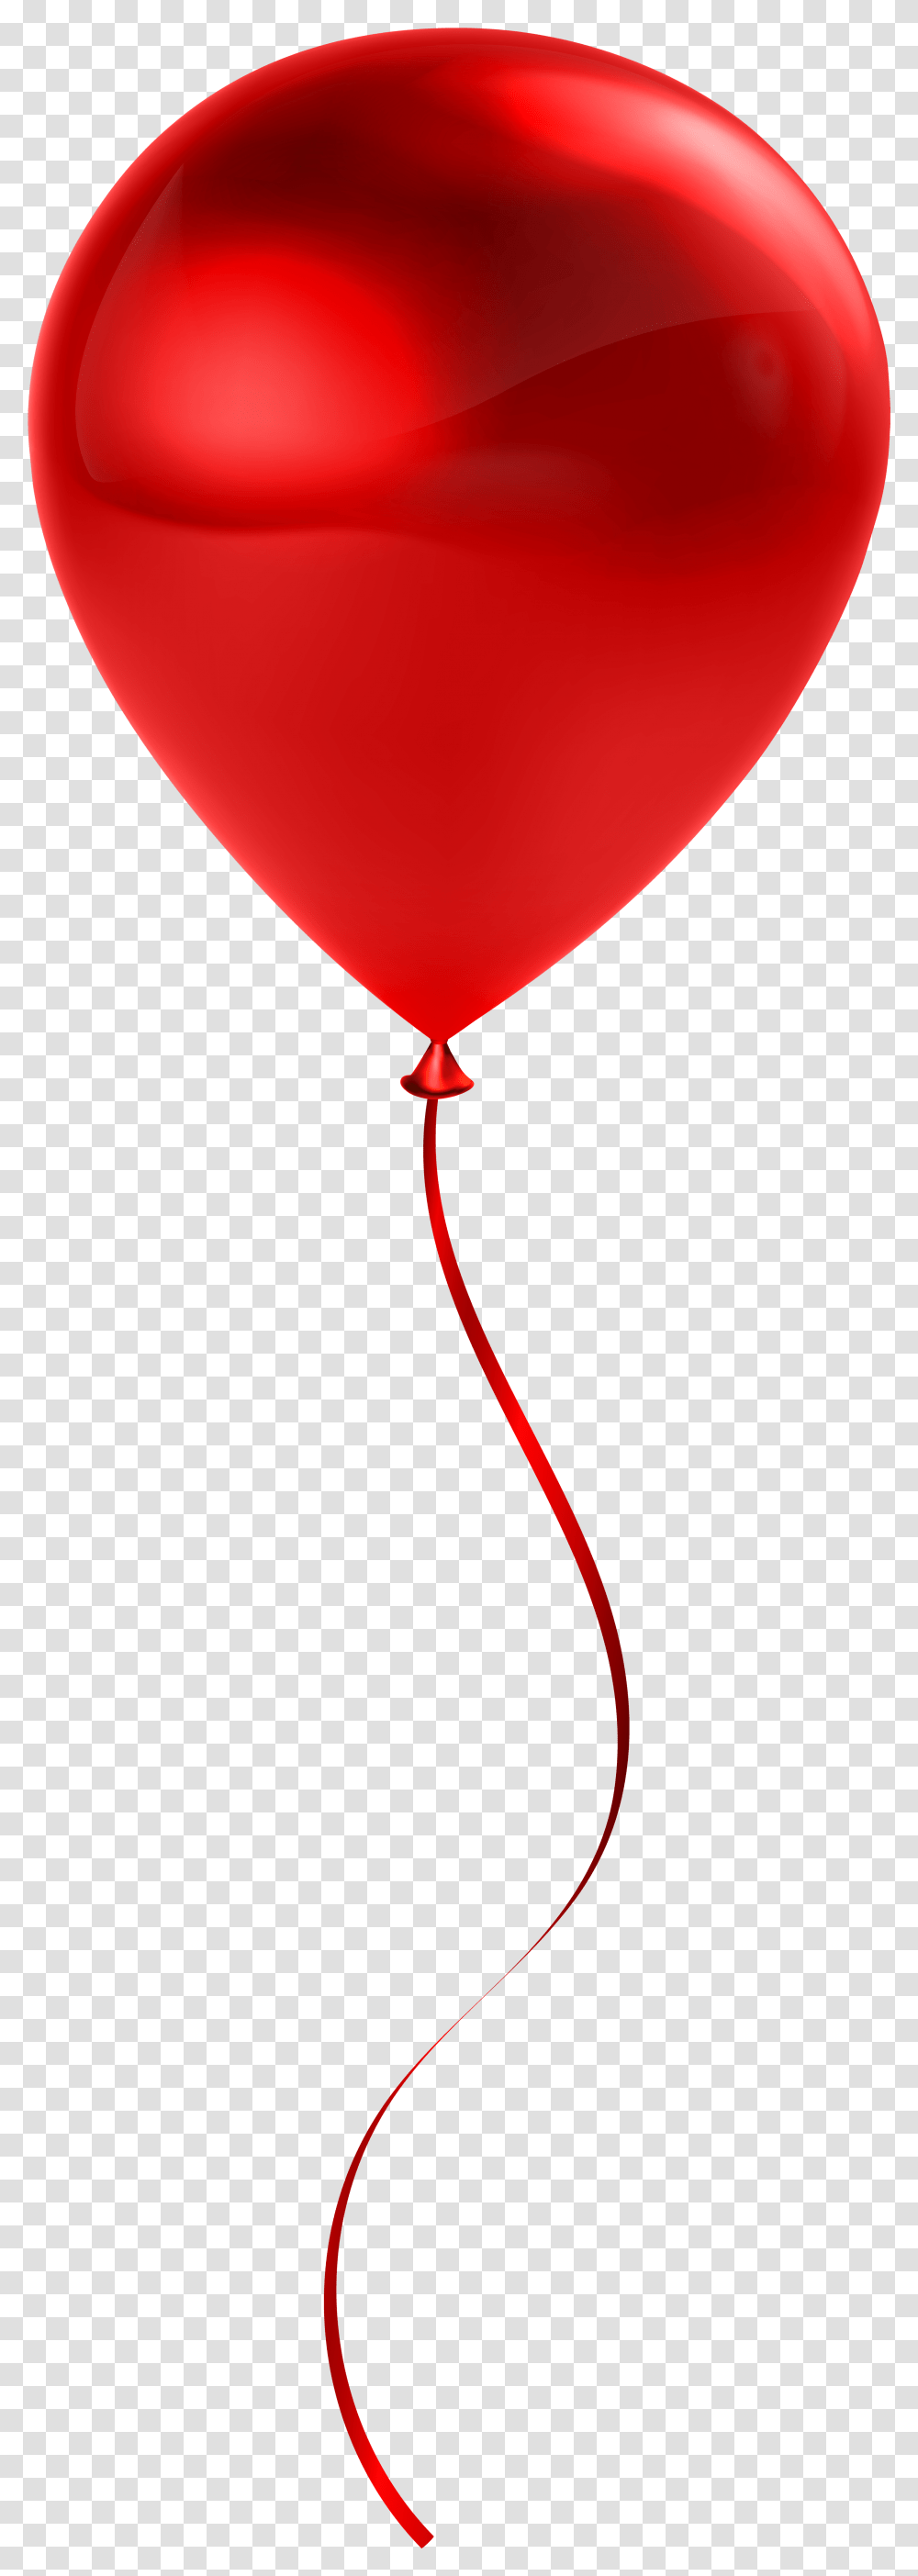 Background Red Balloon Clip Art Realistic Red Balloons Transparent Png